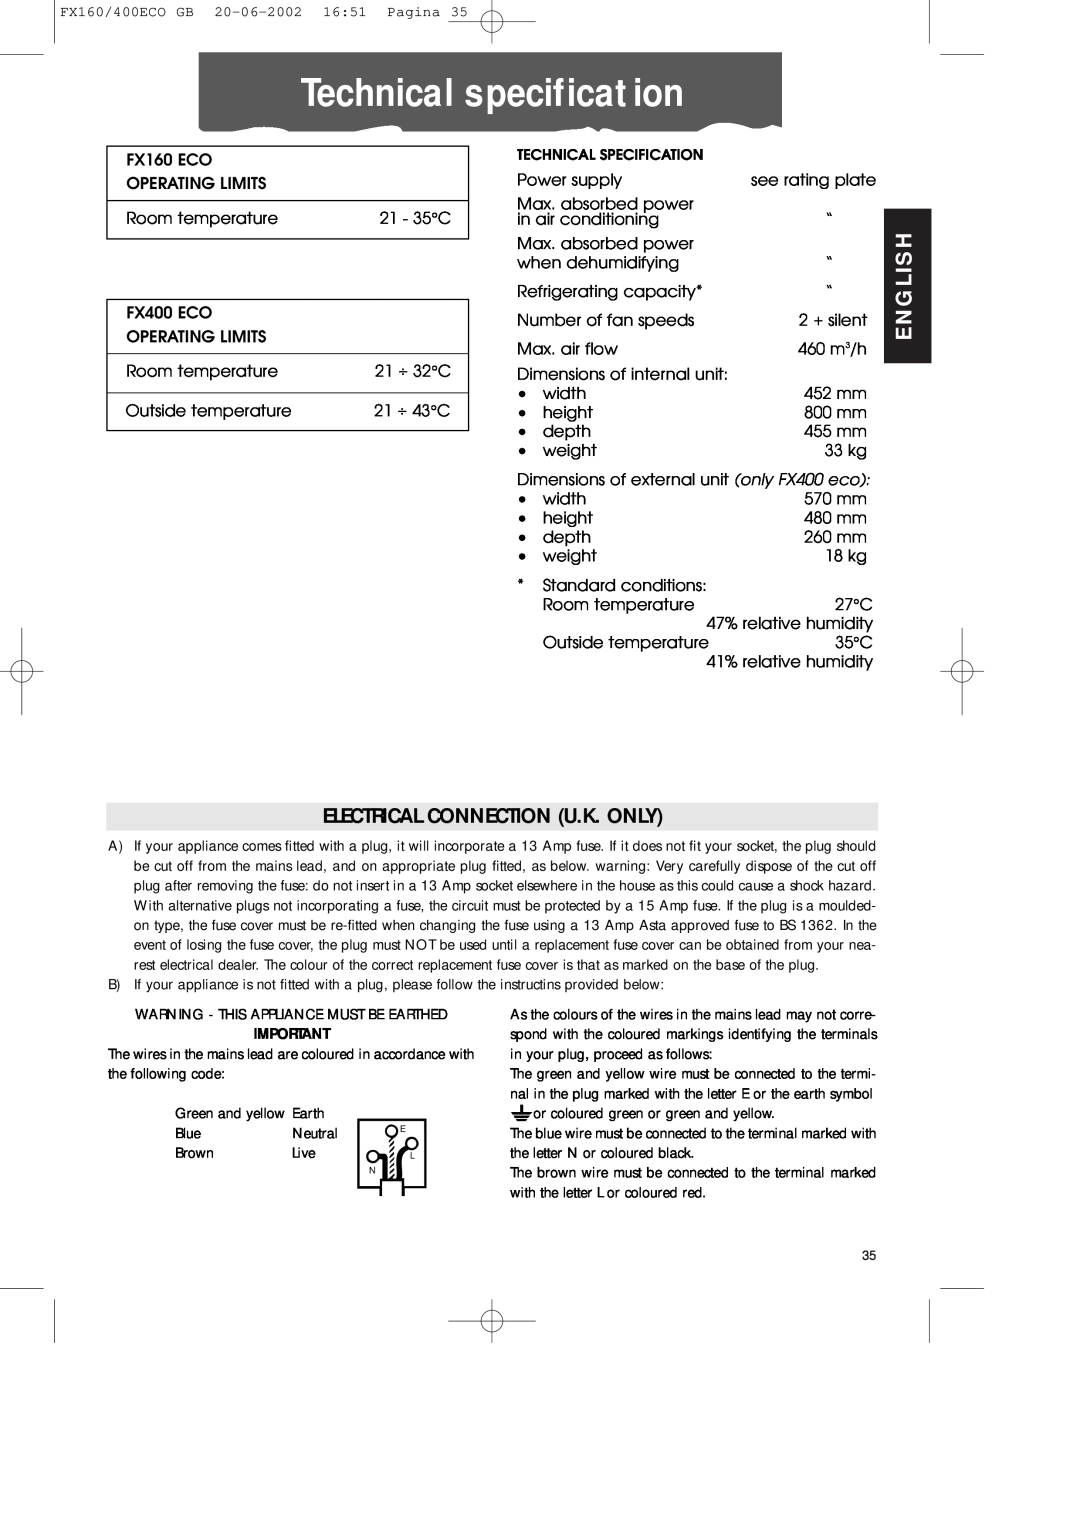 DeLonghi FX400ECO manual Technical specification, English, Electrical Connection U.K. Only 